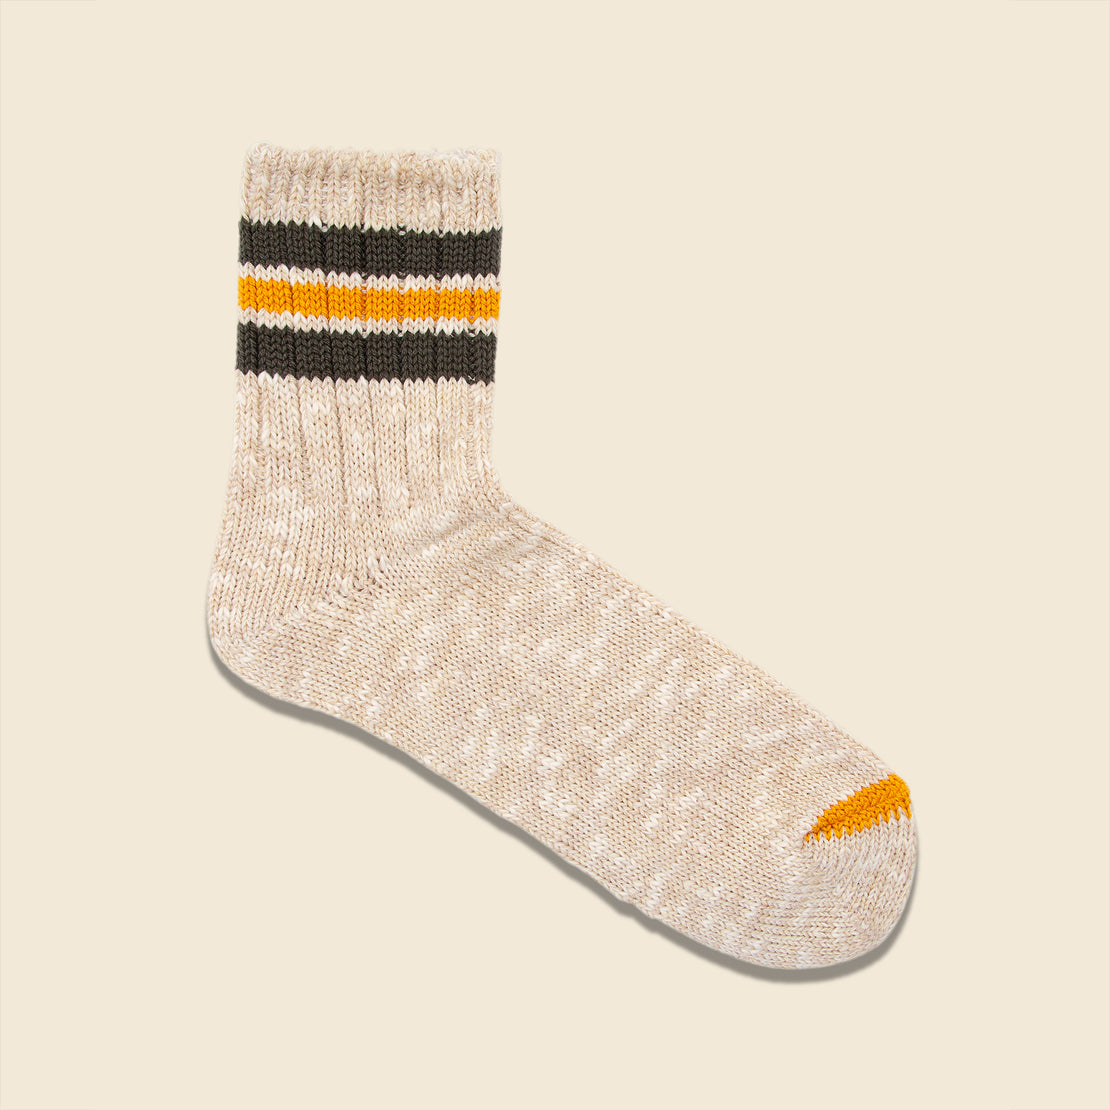 Anonymous Ism 3-Line Quarter Sock - Beige/Yellow/Army